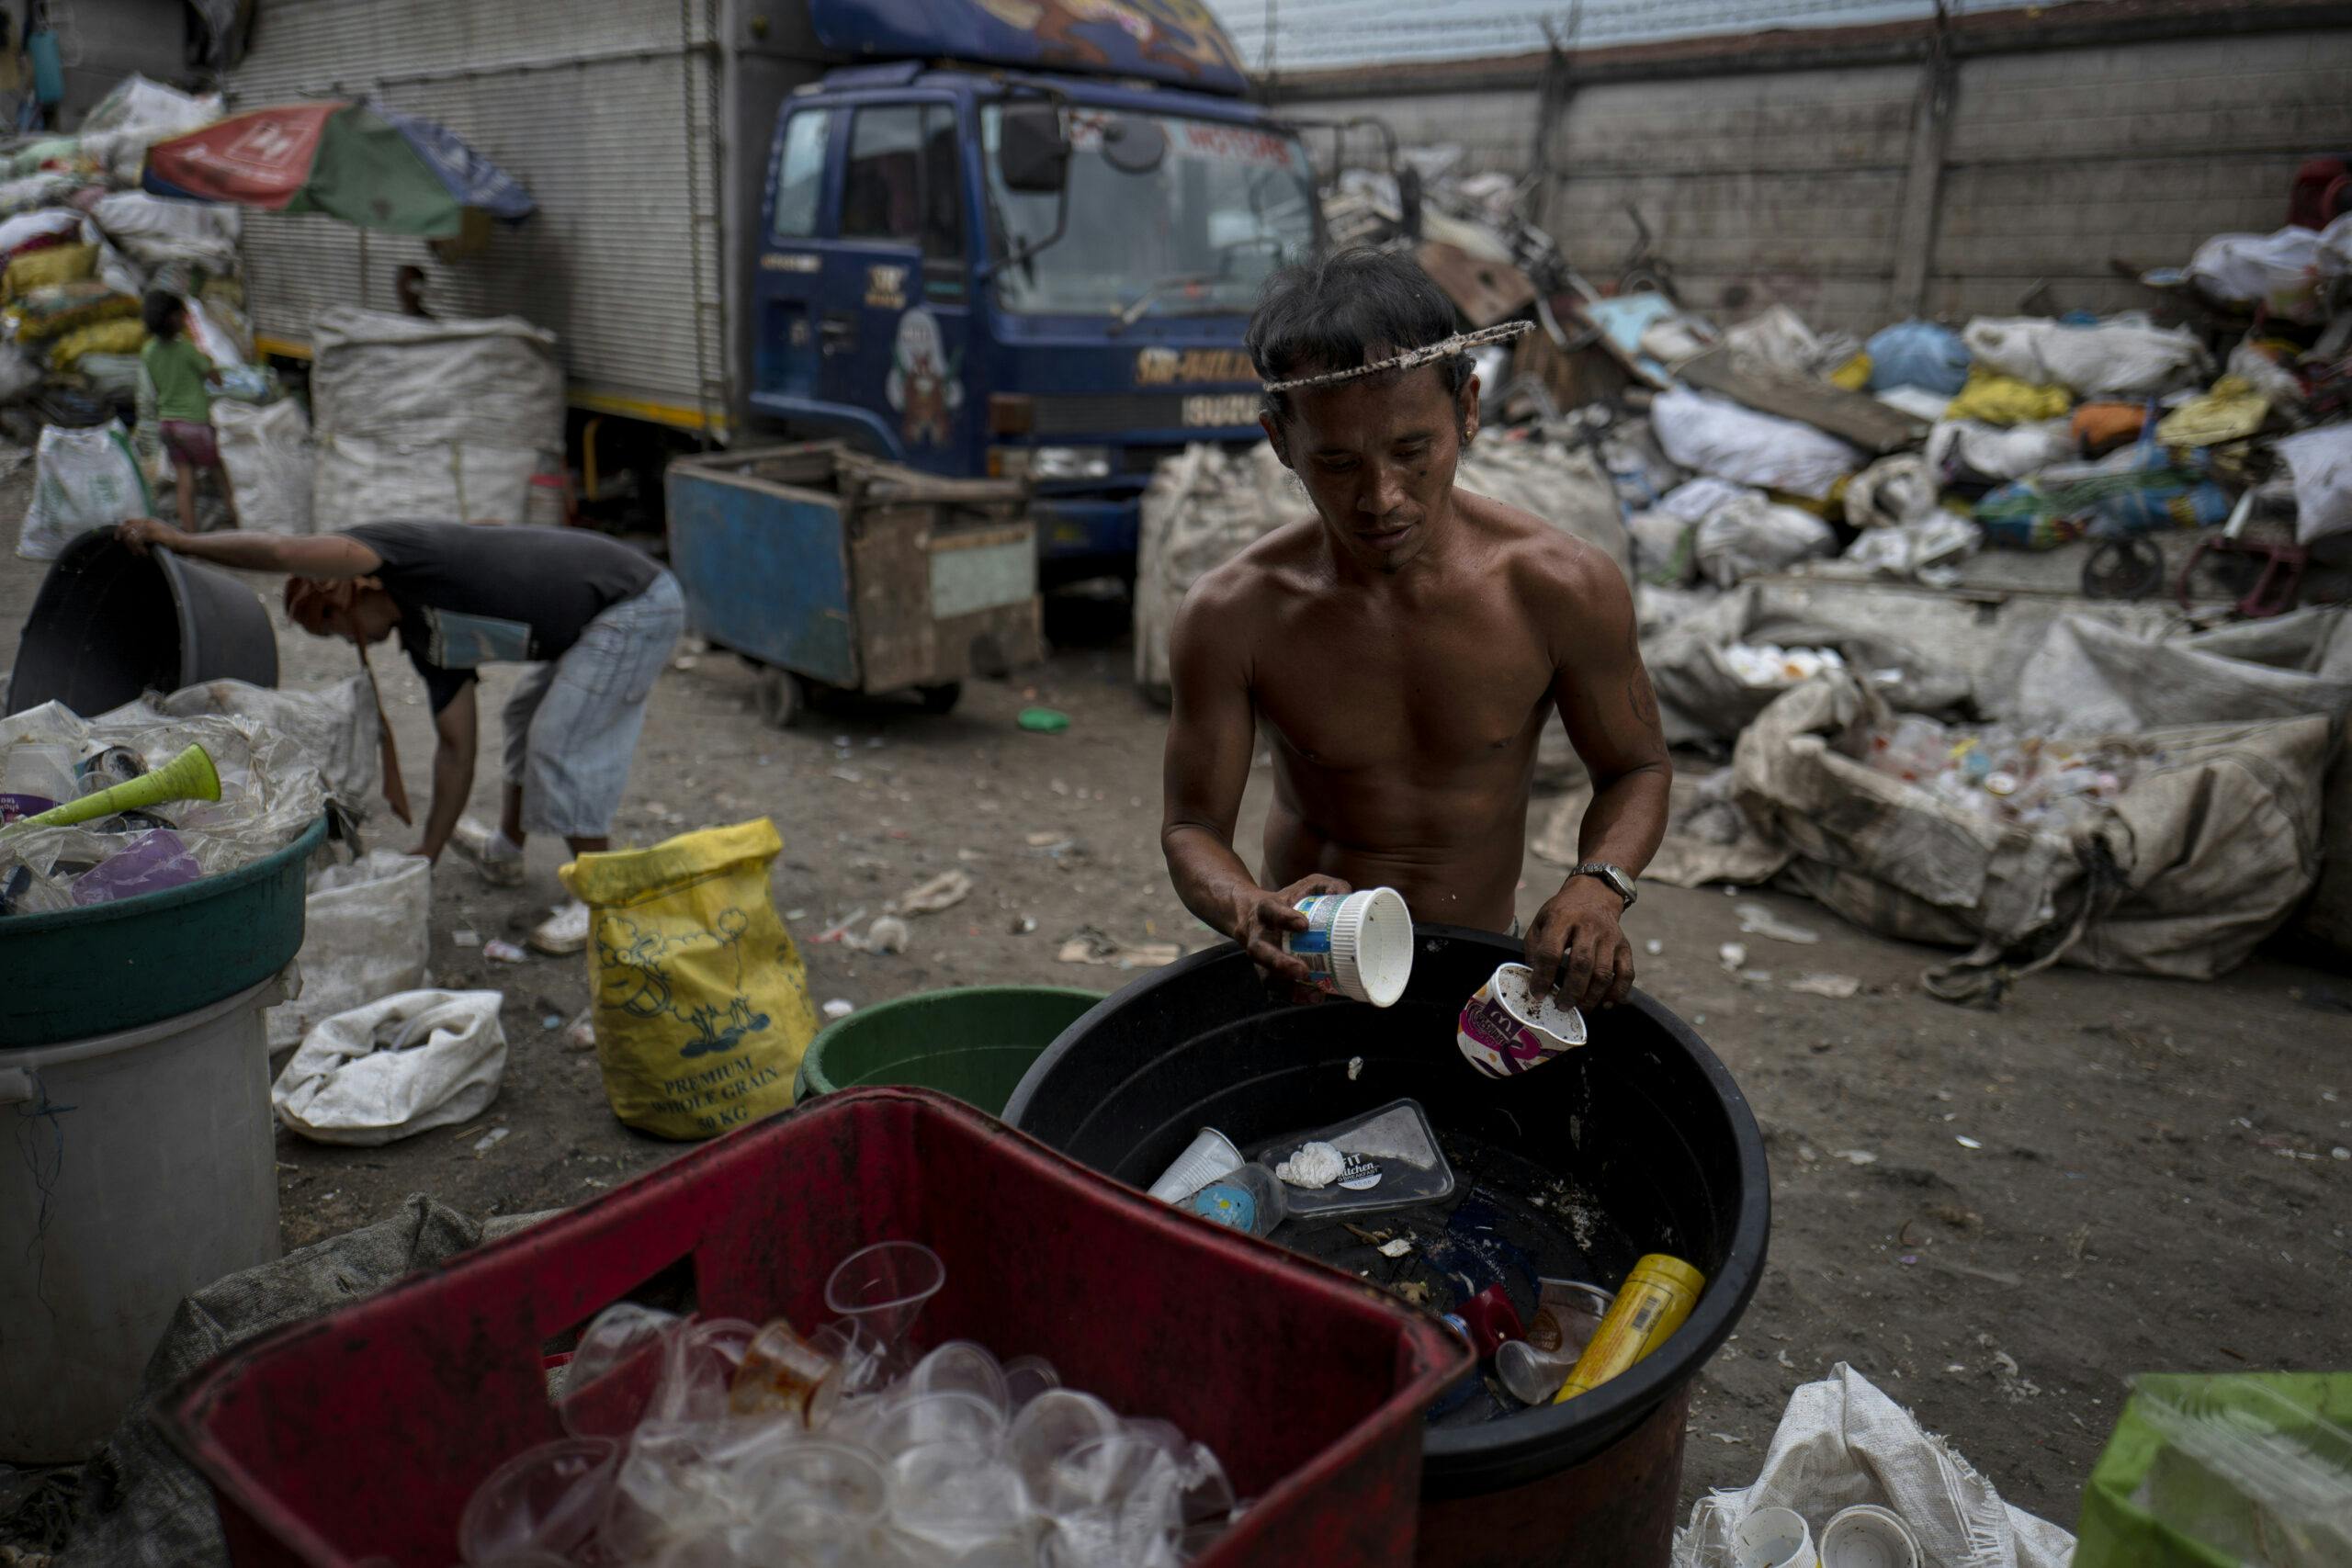 MANILA, PHILIPPINES - APRIL 18: Residents of Happy Land village collects and recycle plastic wastes as a means of living on April 18, 2018 in Manila, Philippines. The Philippines has been ranked third on the list of the world's top-five plastic polluter into the ocean, after China and Indonesia, while reports show that almost half of the global plastic garbage come from developing countries, including Vietnam and Thailand. Sunday marks the 48th iteration of Earth Day, an annual event marked across the world to show support for environmental protection, as organizations aim to dedicate this year's theme towards ending plastic pollution and change people's attitudes and behavior about plastic consumption and the impact it has on the environment. Over a million people have reportedly signed petitions around the world, demanding for corporations to reduce the production of single-use plastics which affects rapidly developing countries as most disposable packaging like food-wrapping, sachets, and shopping bags land up on the coastlines after being discarded. Most of these countries lack the infrastructure to effectively manage their waste and those who live on lower incomes usually rely on cheap products which are sold in single-use sachets such as instant coffee, shampoo, and food seasoning. According to studies, there could be more plastic in the sea than fish by 2050 while actual plastic bits might be in our seafood as fishes consume bits of plastic which are coated in bacteria and algae, mimicking their natural food sources, and eventually lands on our dinner table. (Photo by Jes Aznar/Getty Images)